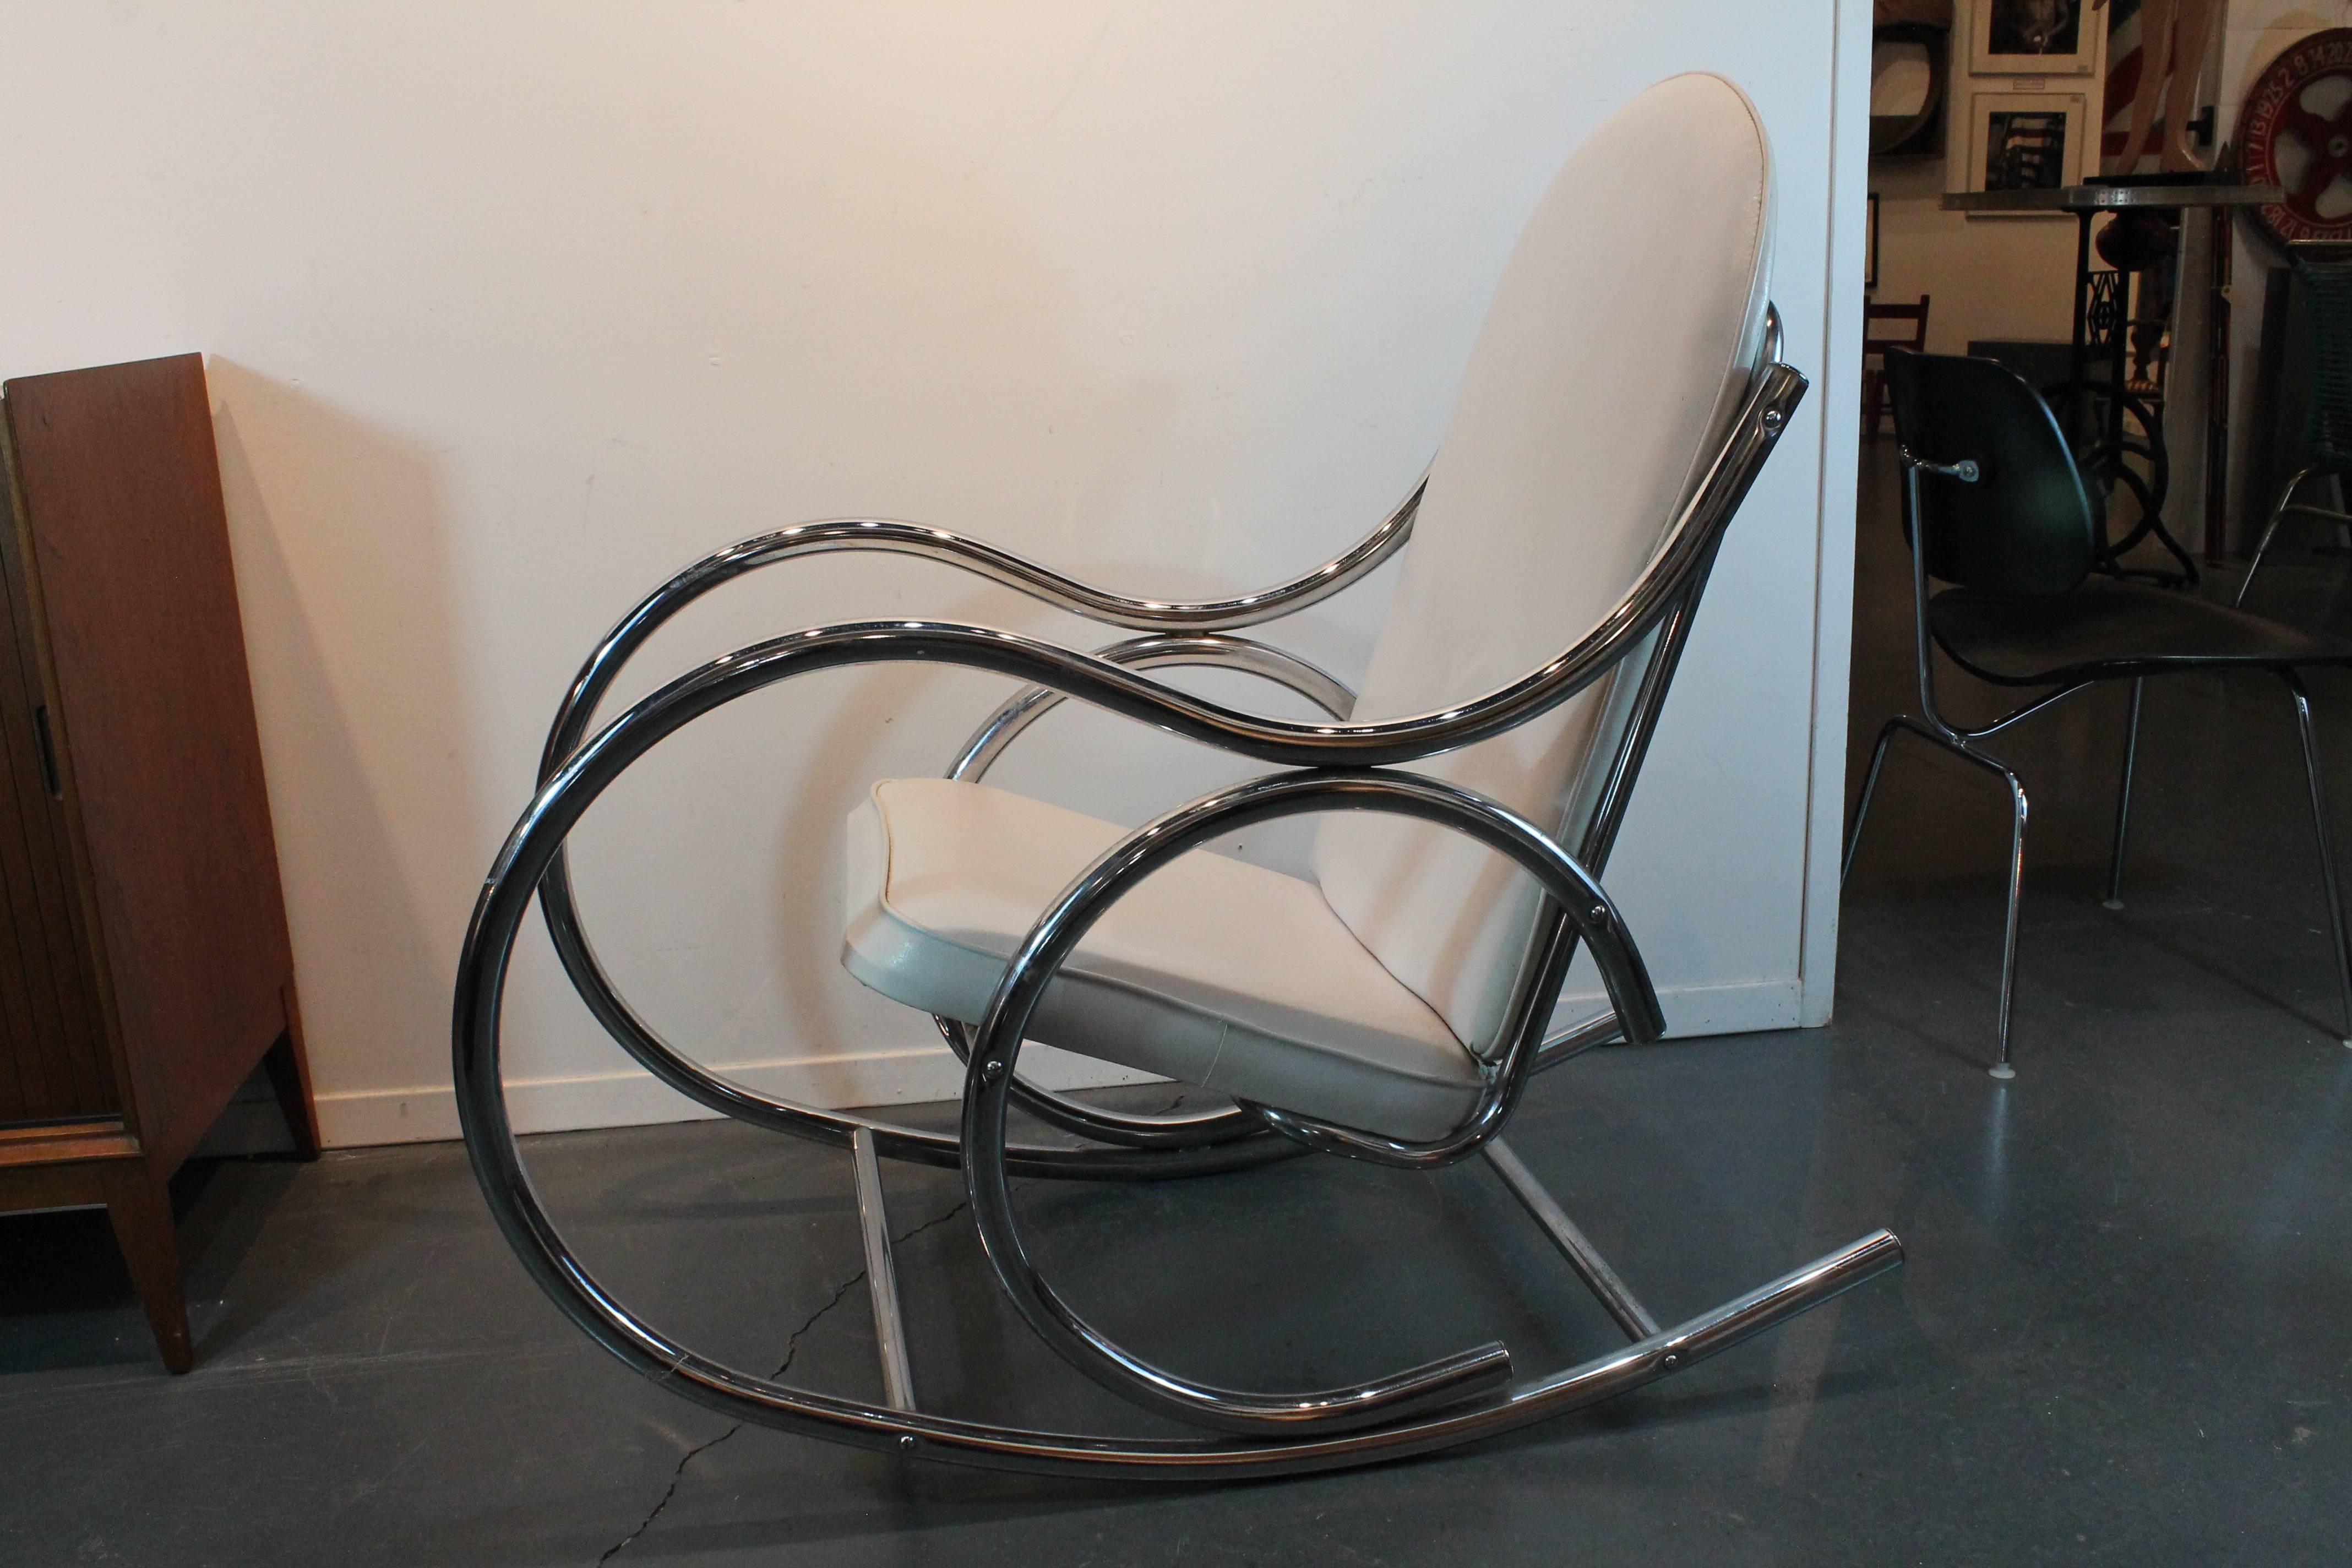 Great modernized Thonet inspired rocking chair in chromed tubular steel with a white vinyl seat and back.
Wonderful profile and very sculptural!